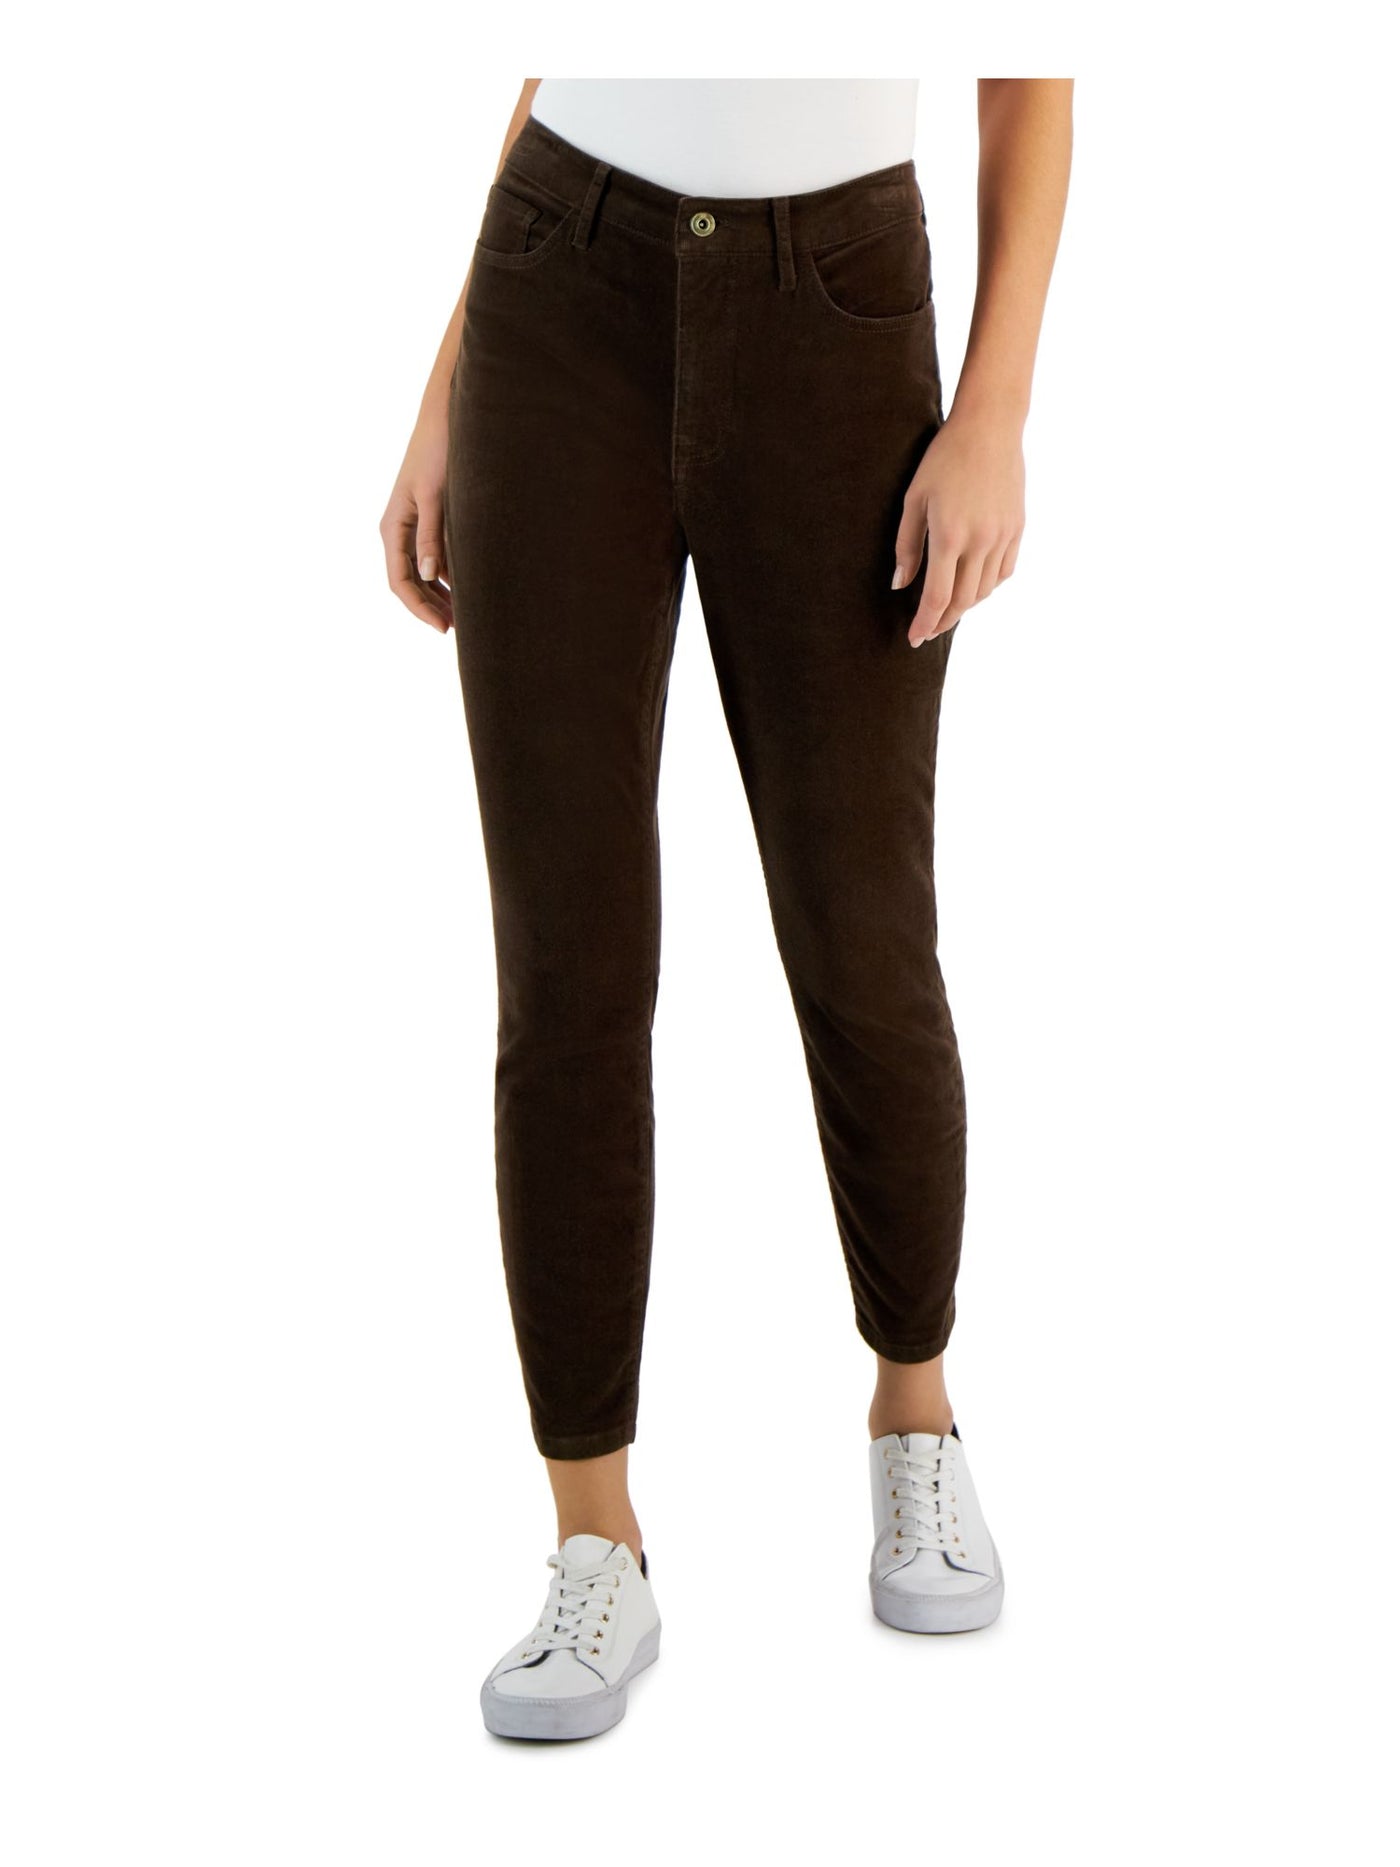 TOMMY HILFIGER Womens Brown Stretch Corduroy Zippered Pocketed Ankle Skinny Pants 16